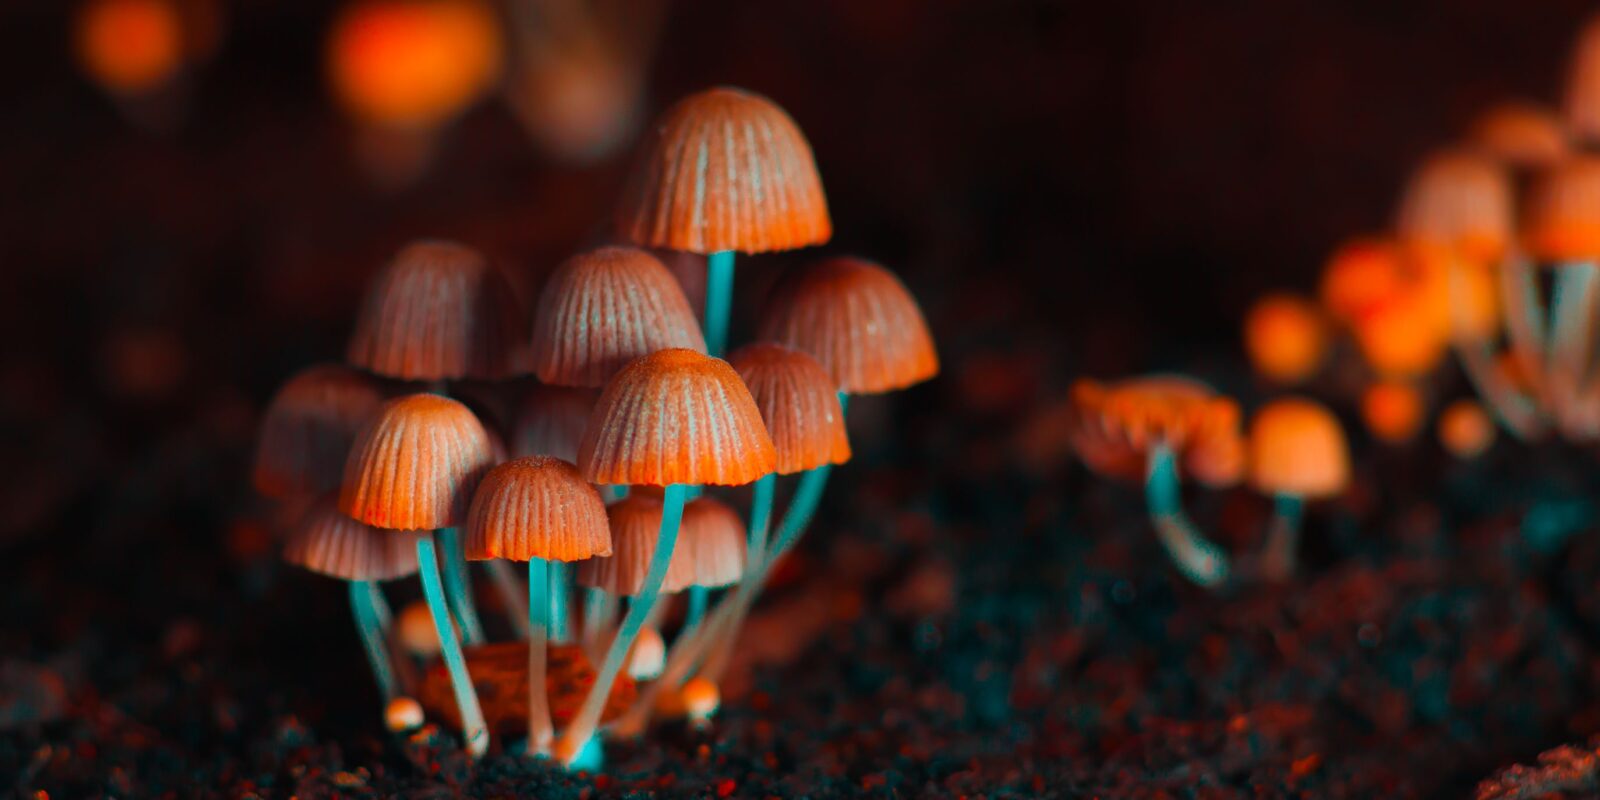 Top 5 Magic Mushroom Strains for Cultivation